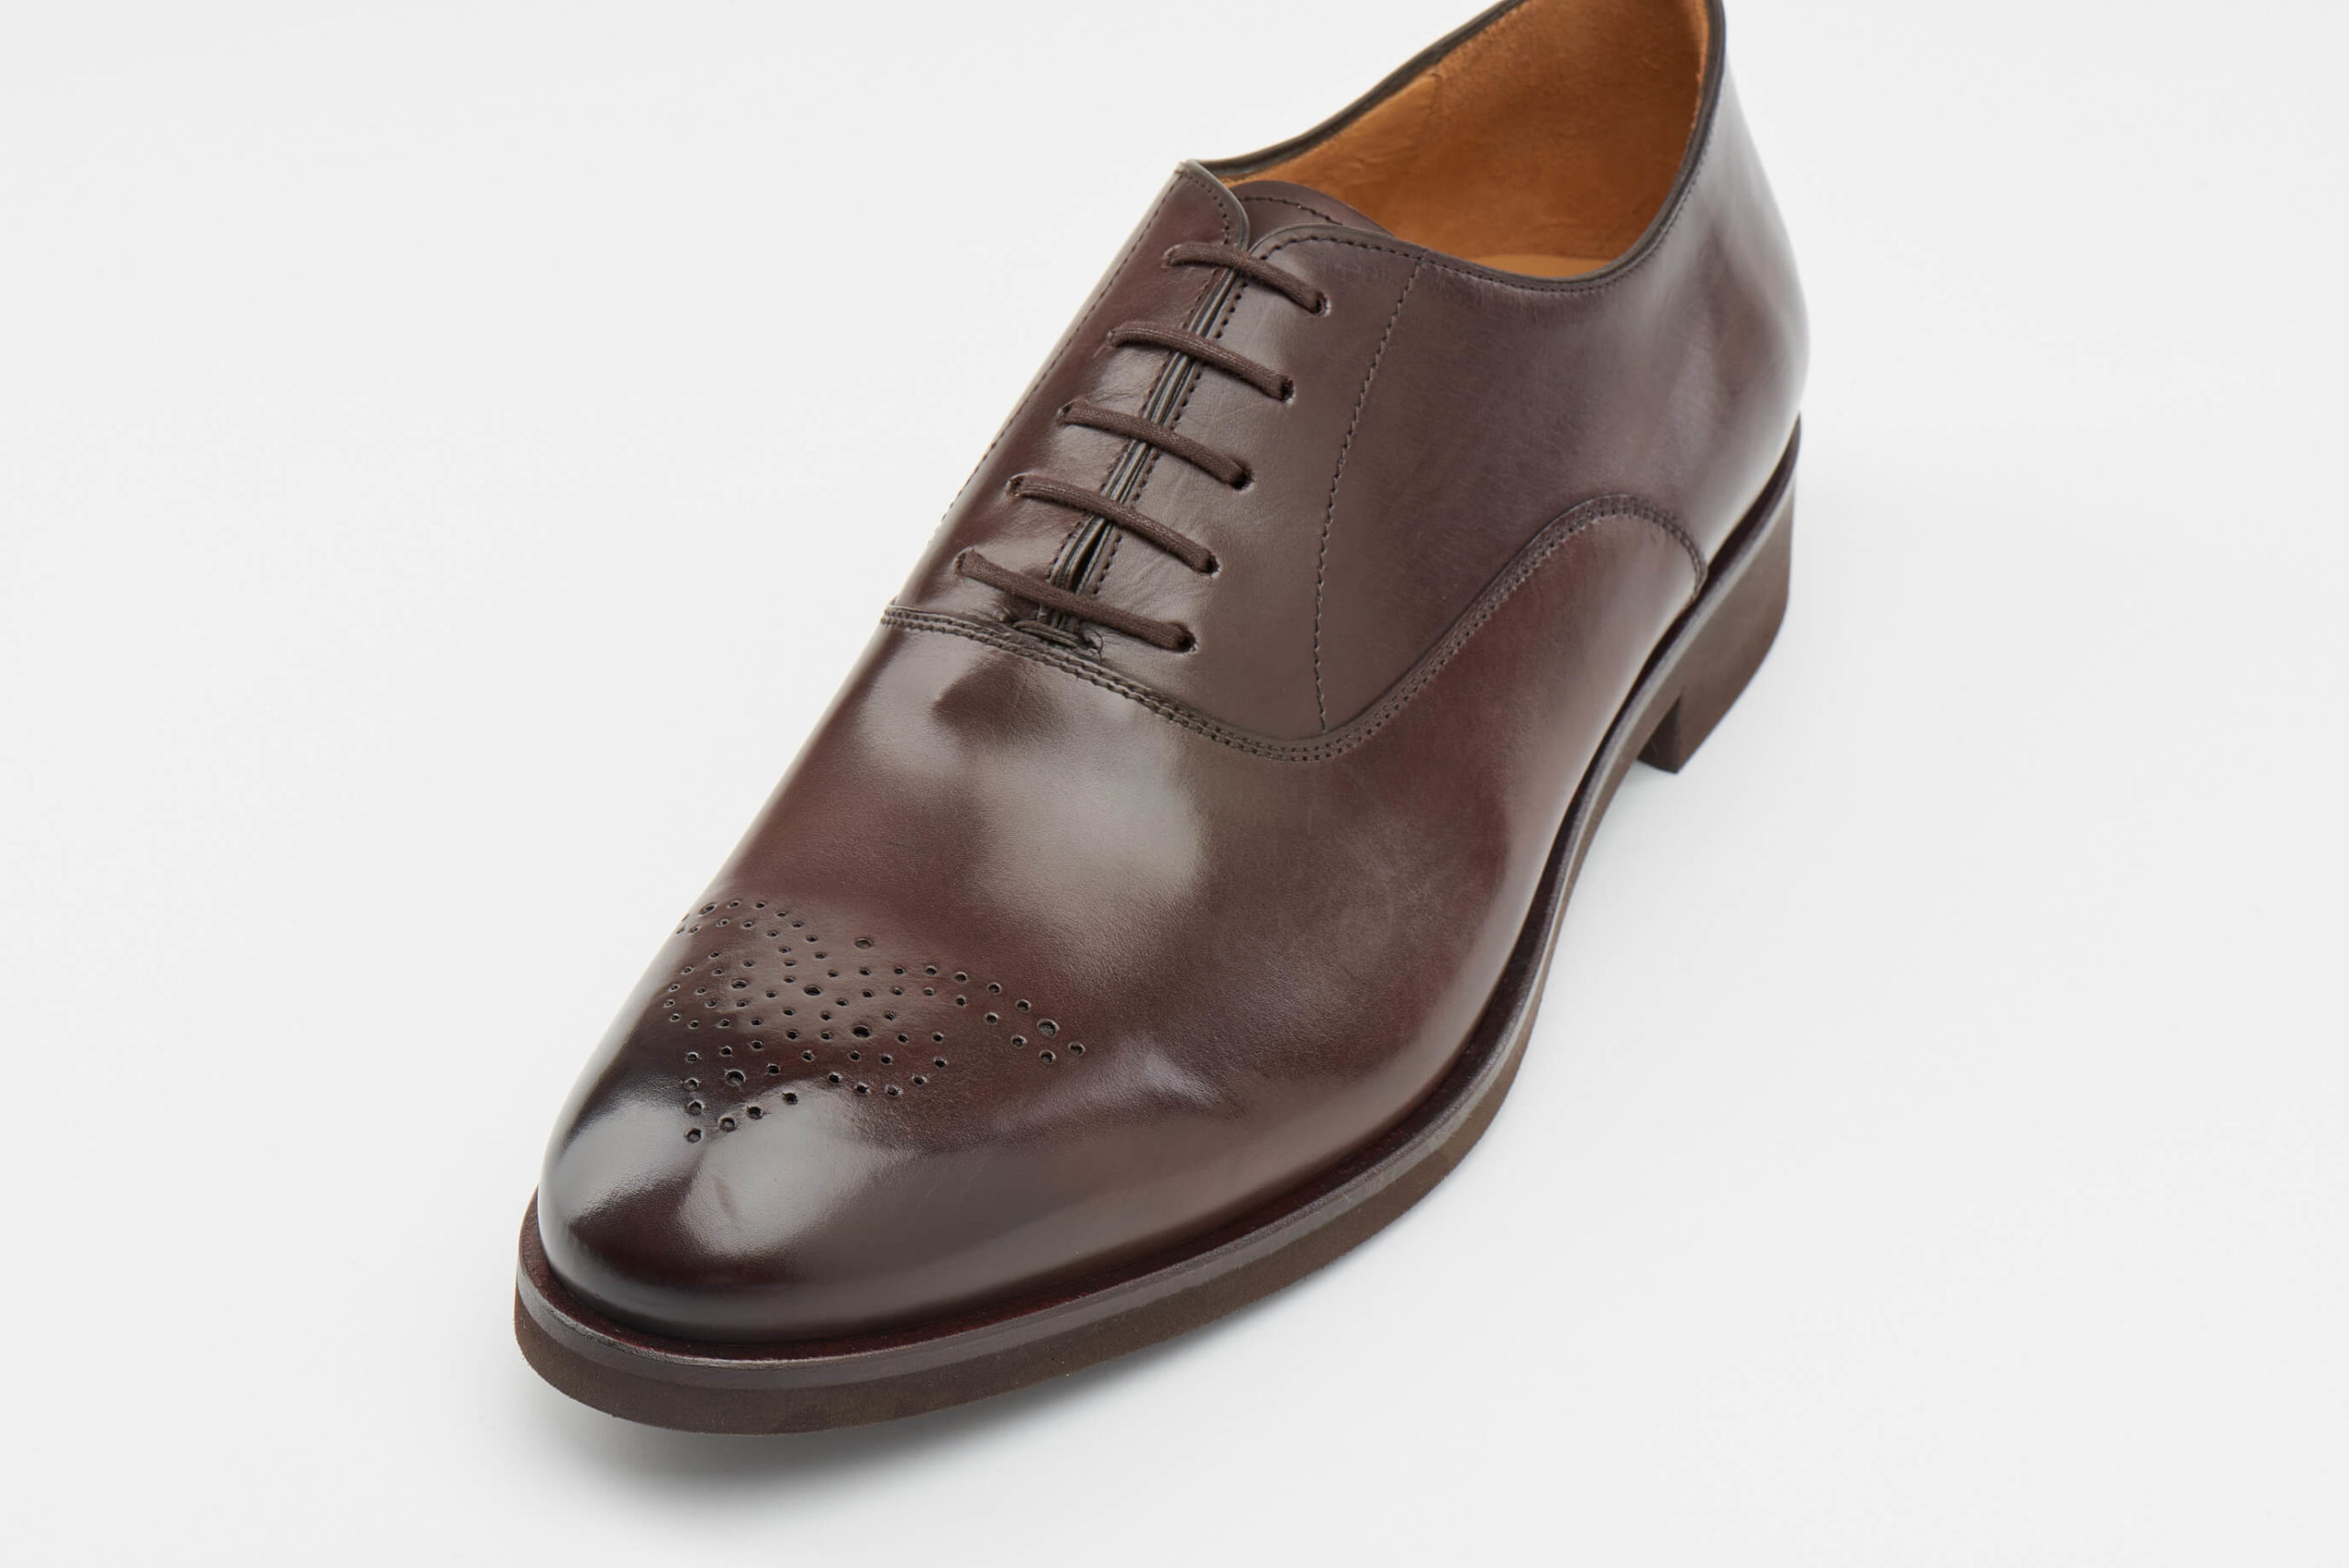 Luis Onofre Portuguese Shoes FW22 – HS0785_02 – Decaf Brown-5